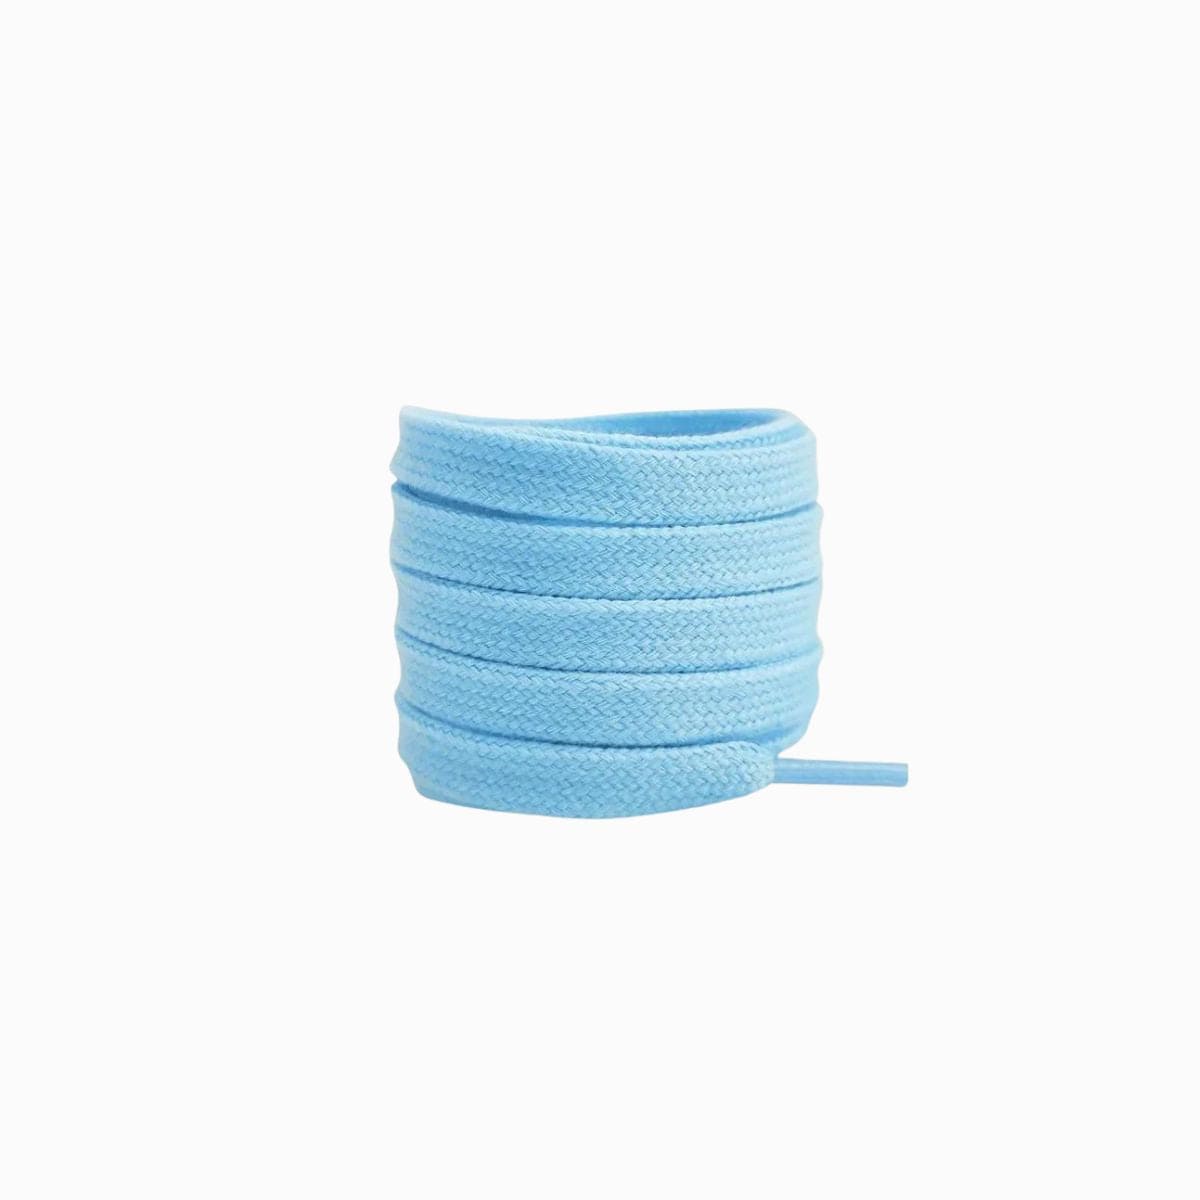 Light Blue Replacement Shoe Laces for Adidas Samba Sneakers by Kicks Shoelaces